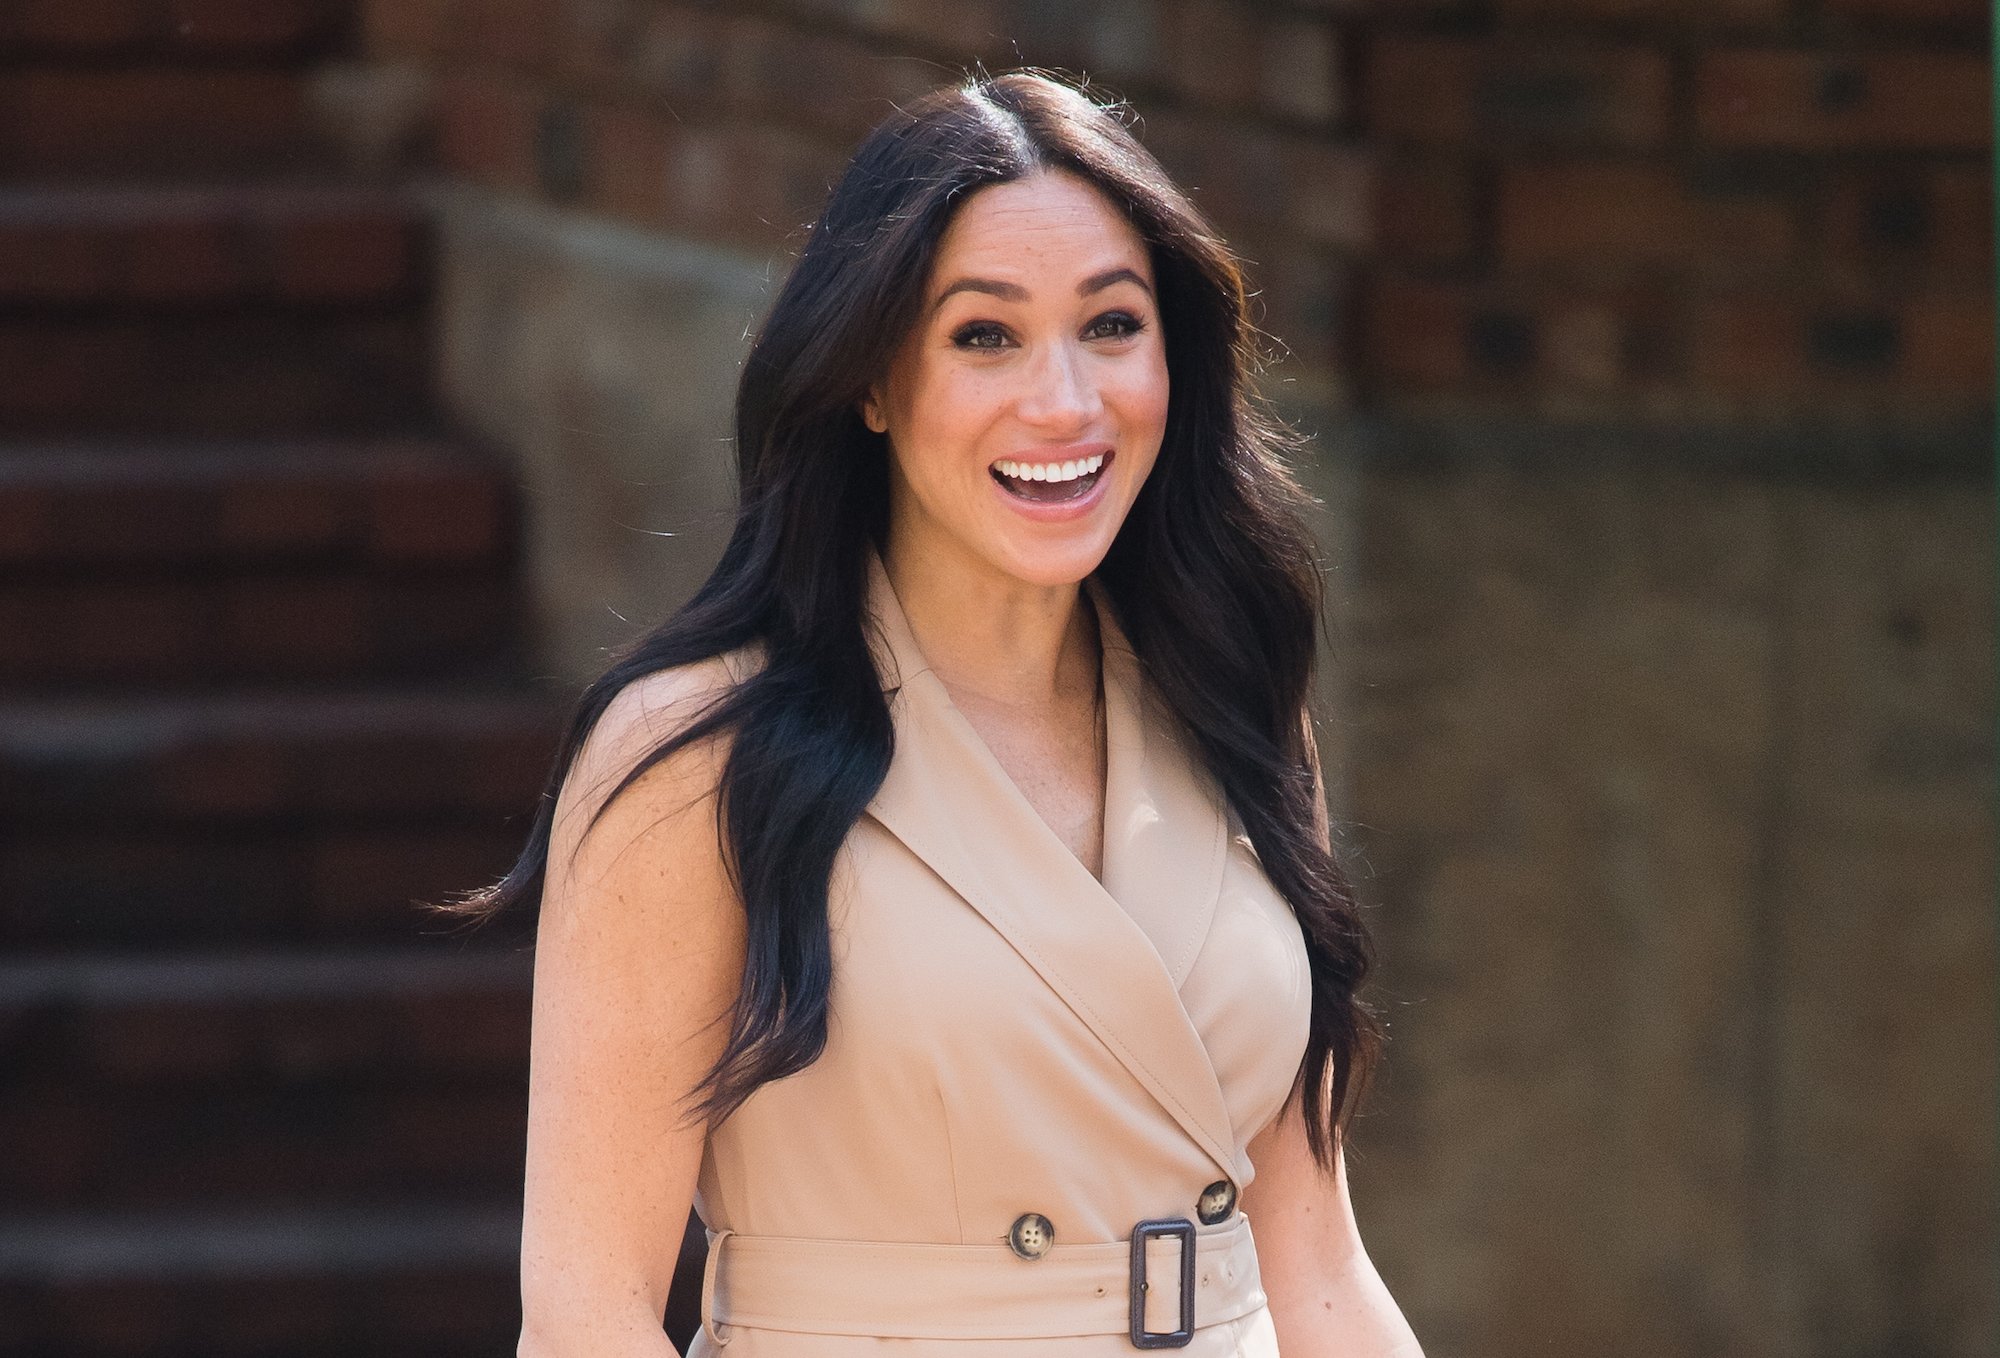 Meghan Markle smiling in front of a brick building